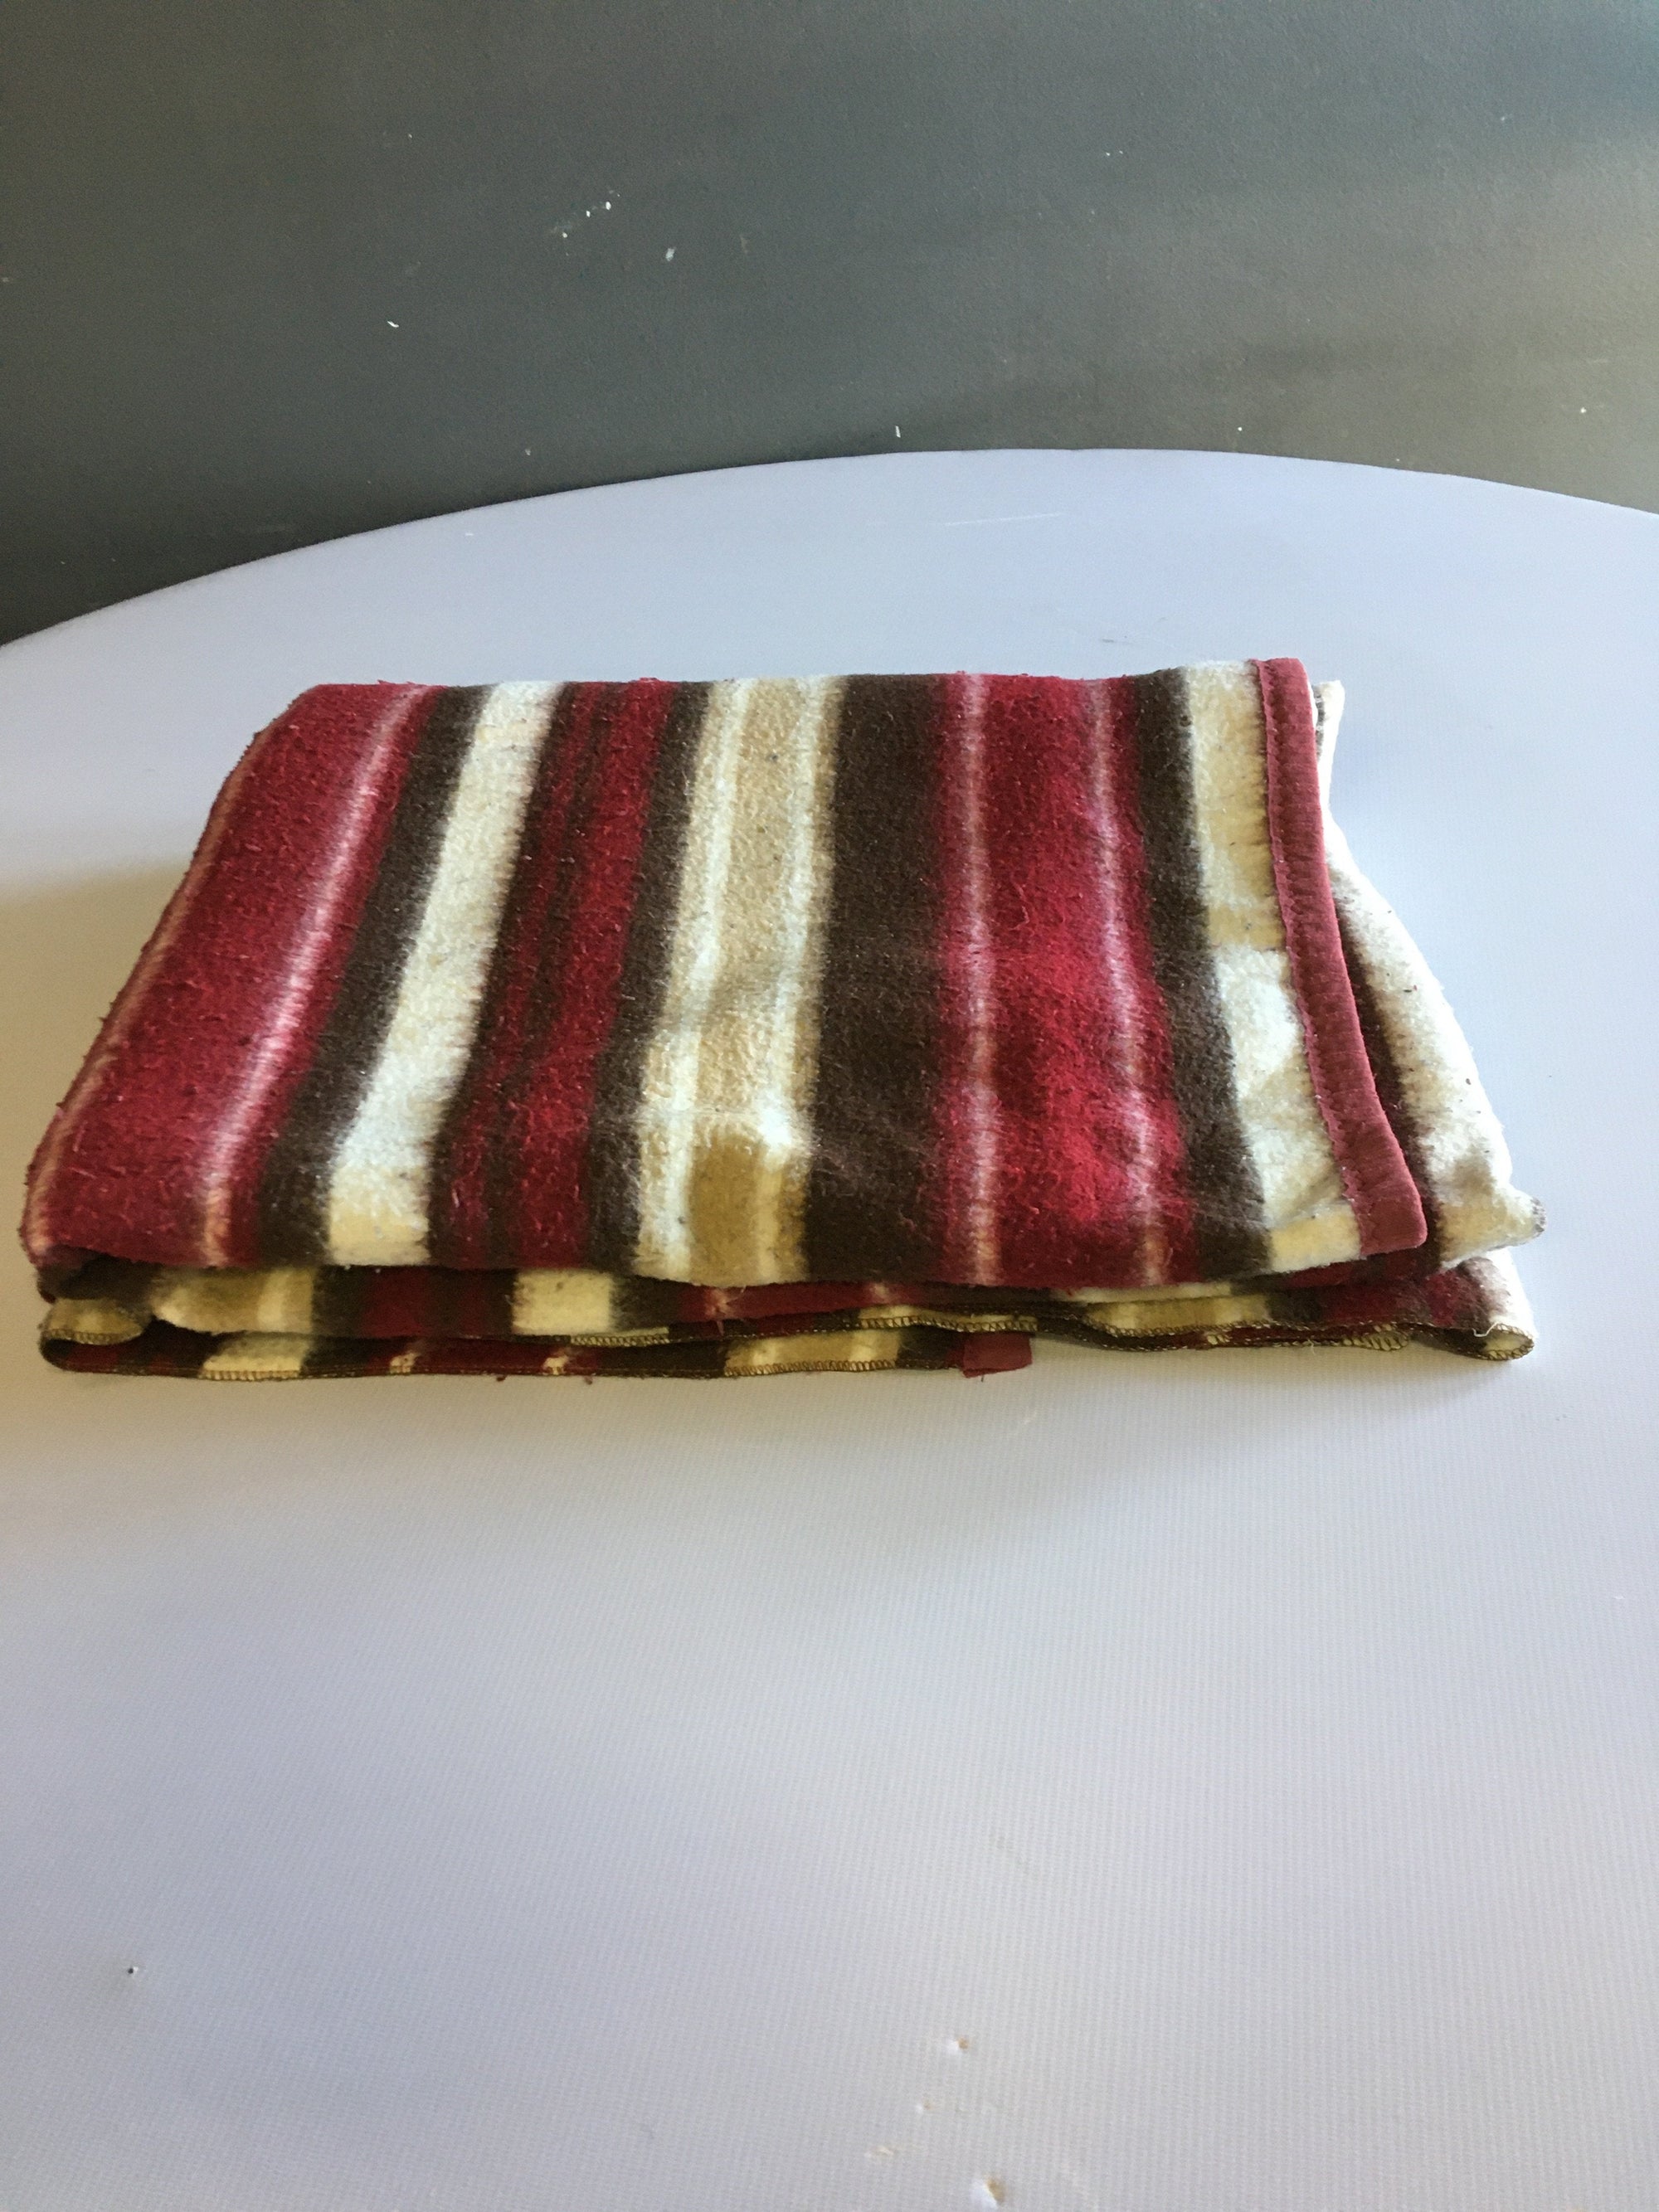 Red And Brown Blanket - 2ndhandwarehouse.com